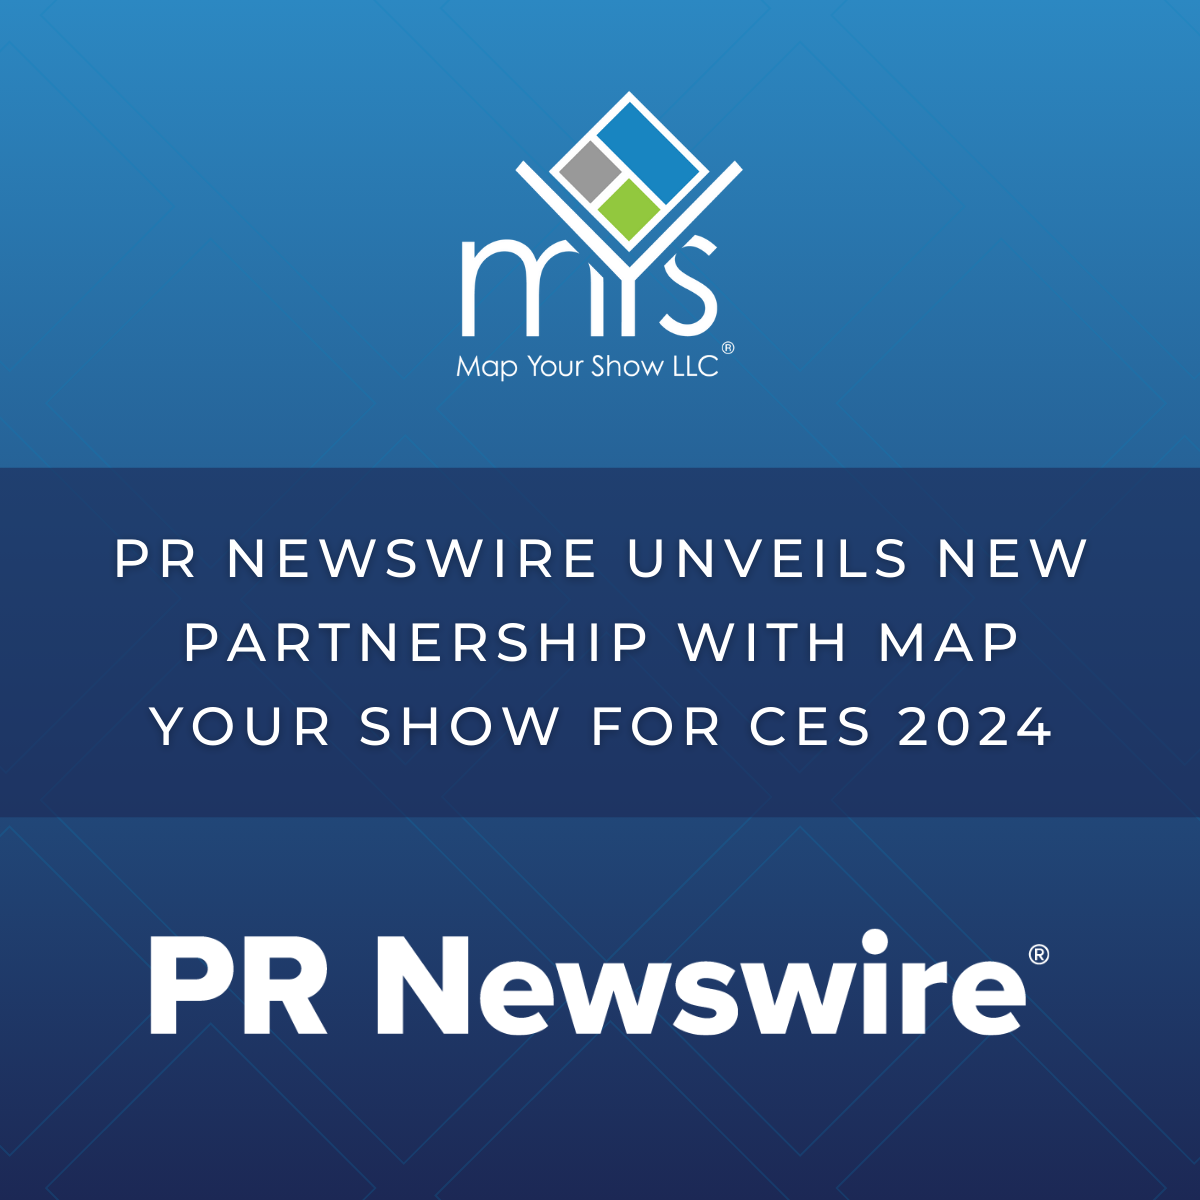 PR Newswire Unveils New Partnership with Map Your Show for CES 2024